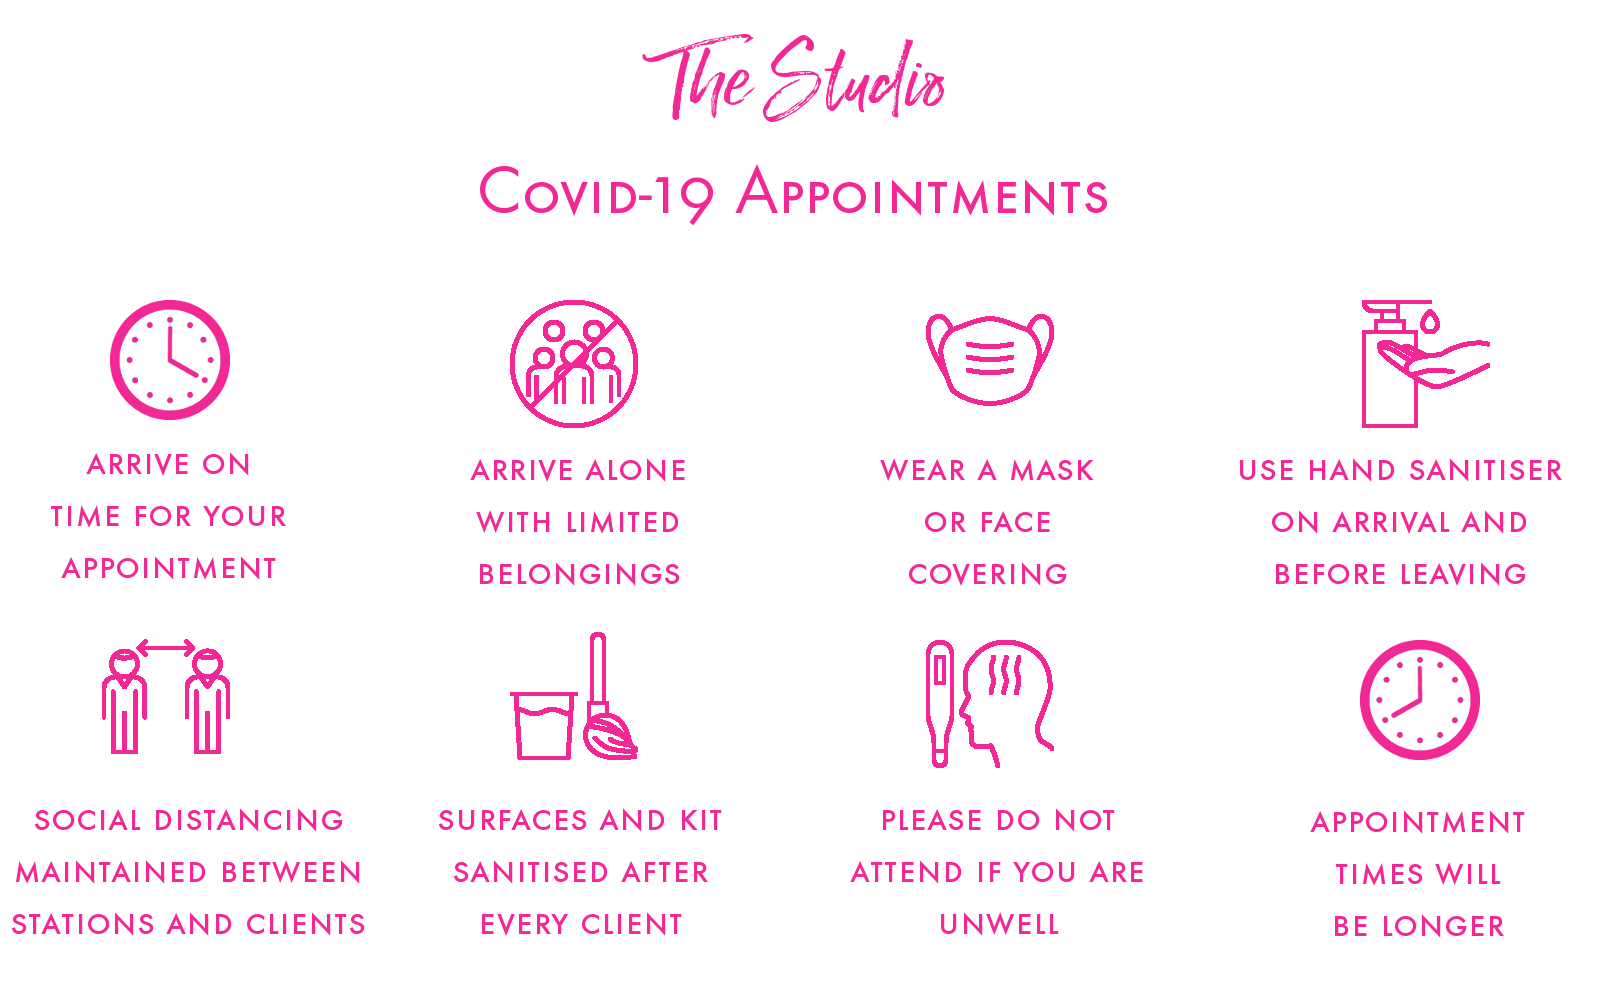 COVID 19 Appointments

Please arrive on time for an appointment
Please arrive along and with limited belongings
Please wear a mask or face covering
Please use hand sanitiser on arrival and before leaving
Social distancing will be maintained between stations and clients
Surfaces and kit will be sanitised after every client
Please DO NOT attend if you are unwell and rebook your appointment
NOTE appointment times will be longer